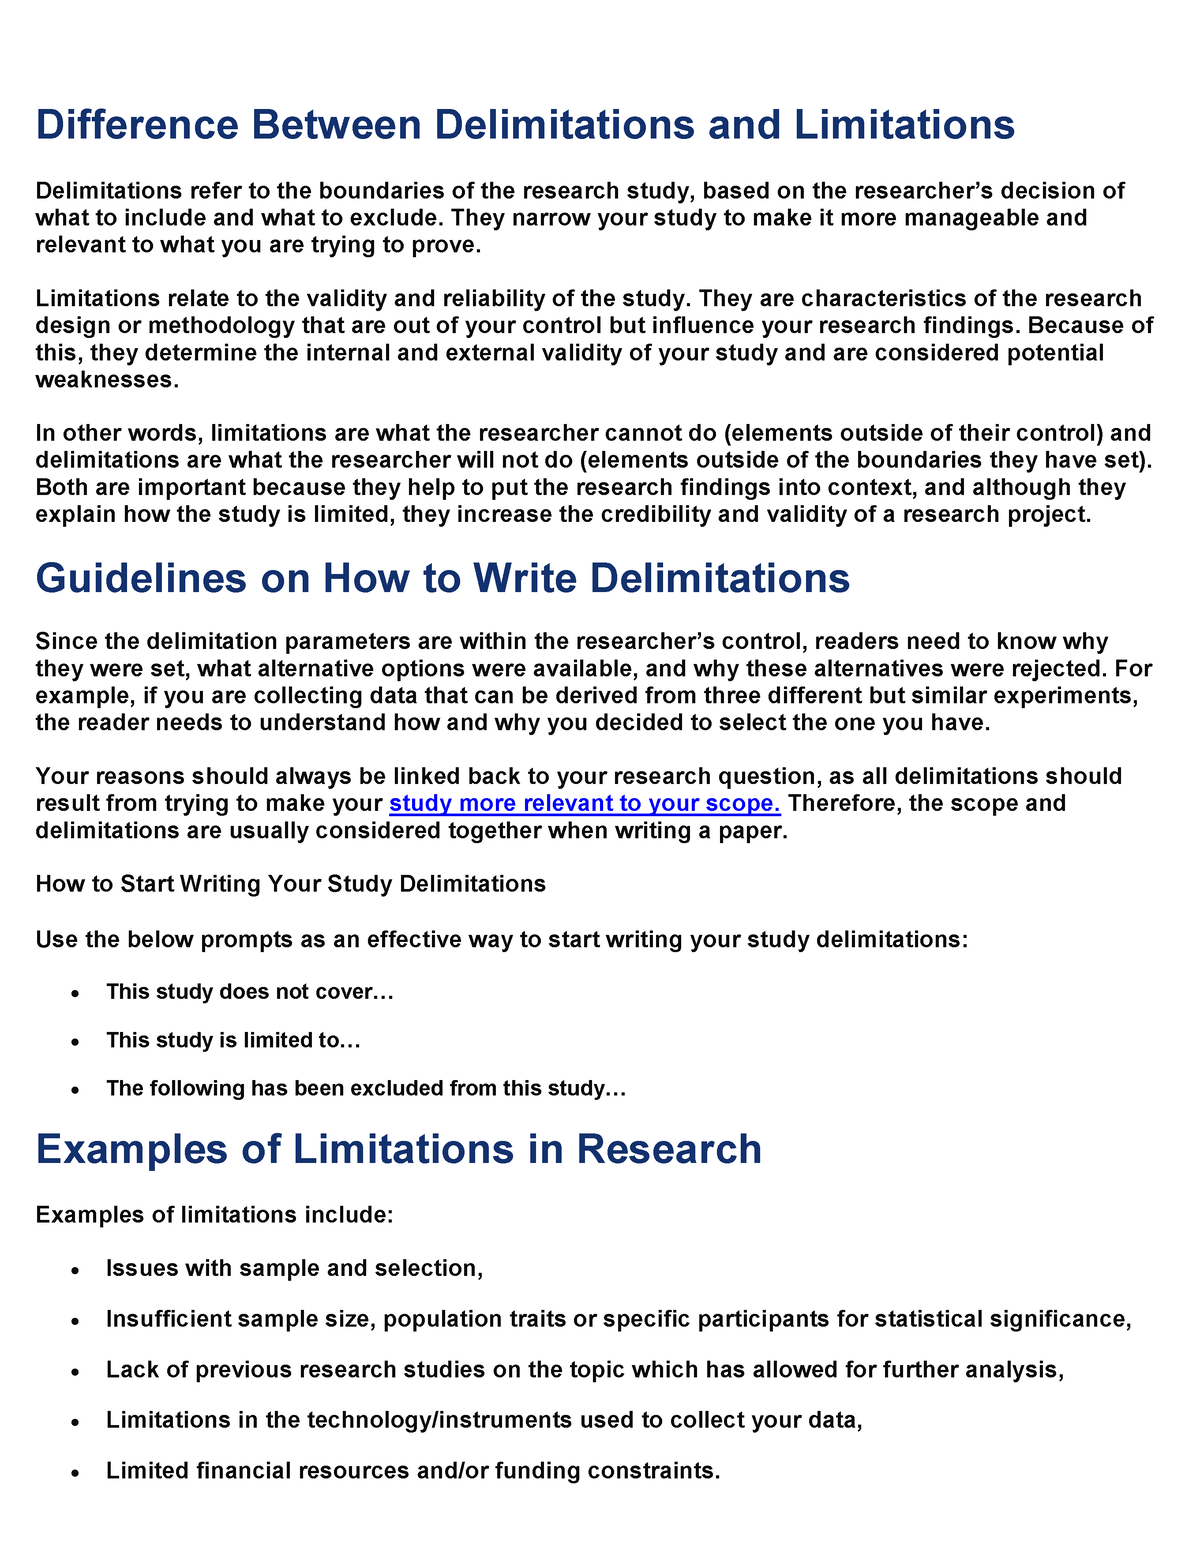 limitations and delimitations in educational research